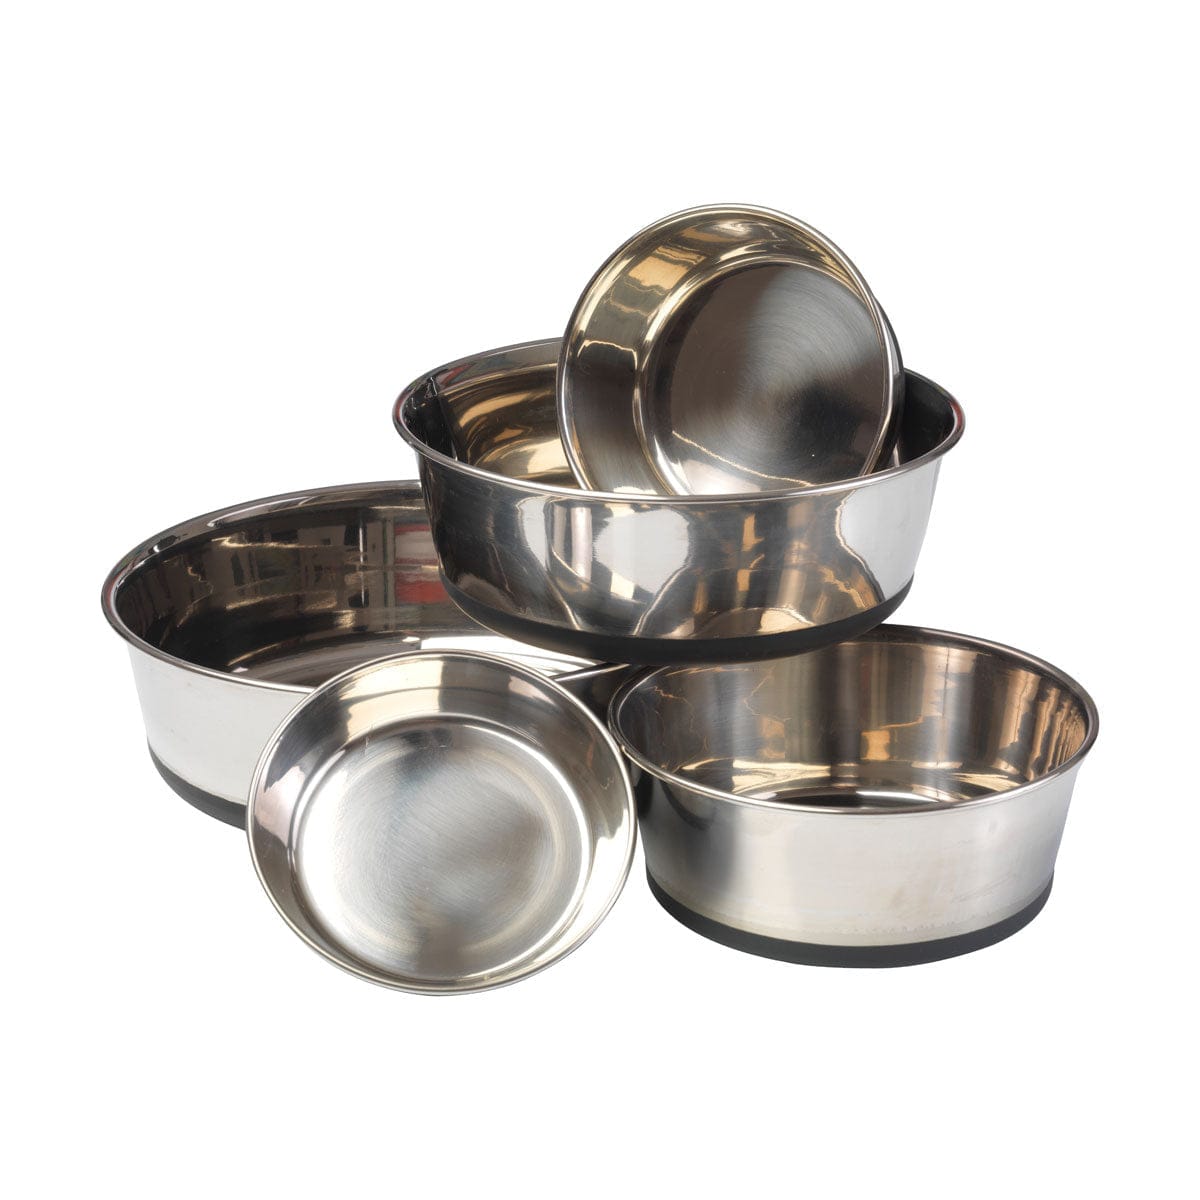 House of paws stainless steel dog bowl